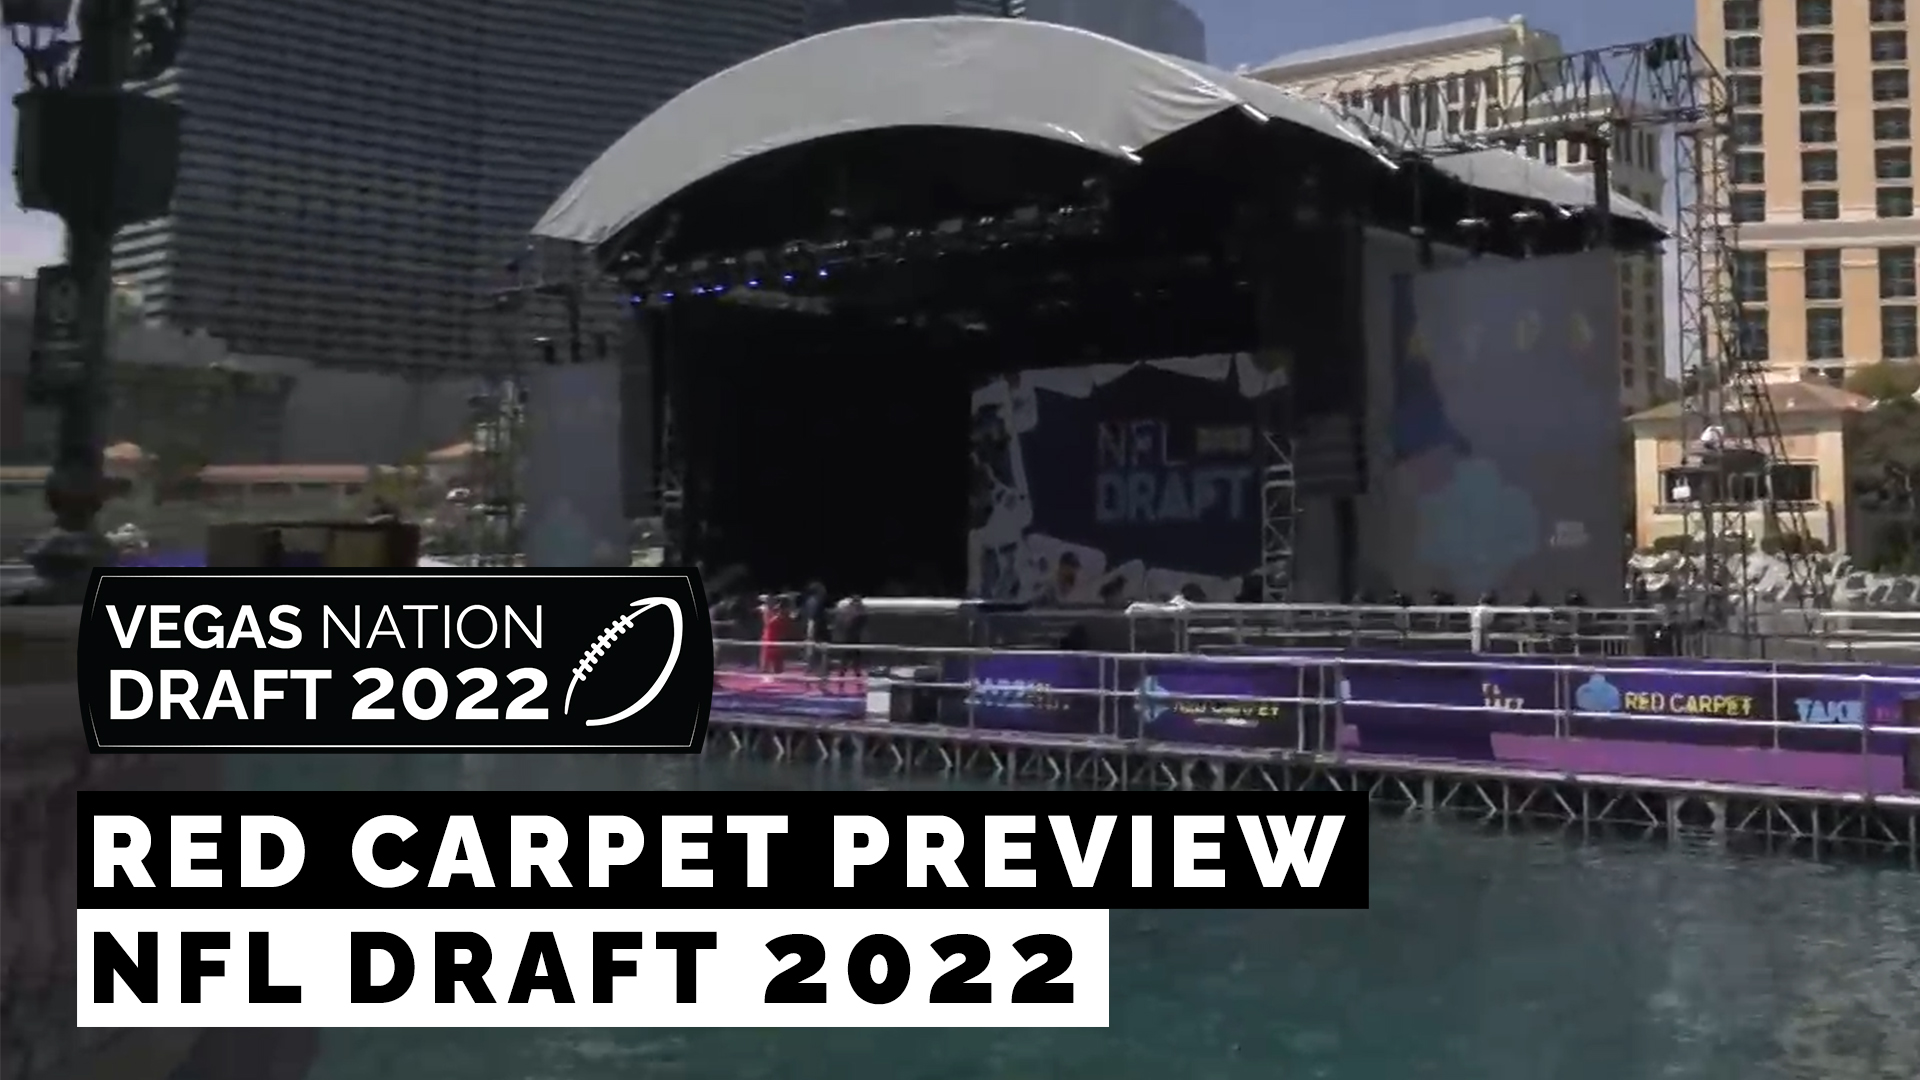 NFL Draft: Preview of The Bellagio Fountains Stage